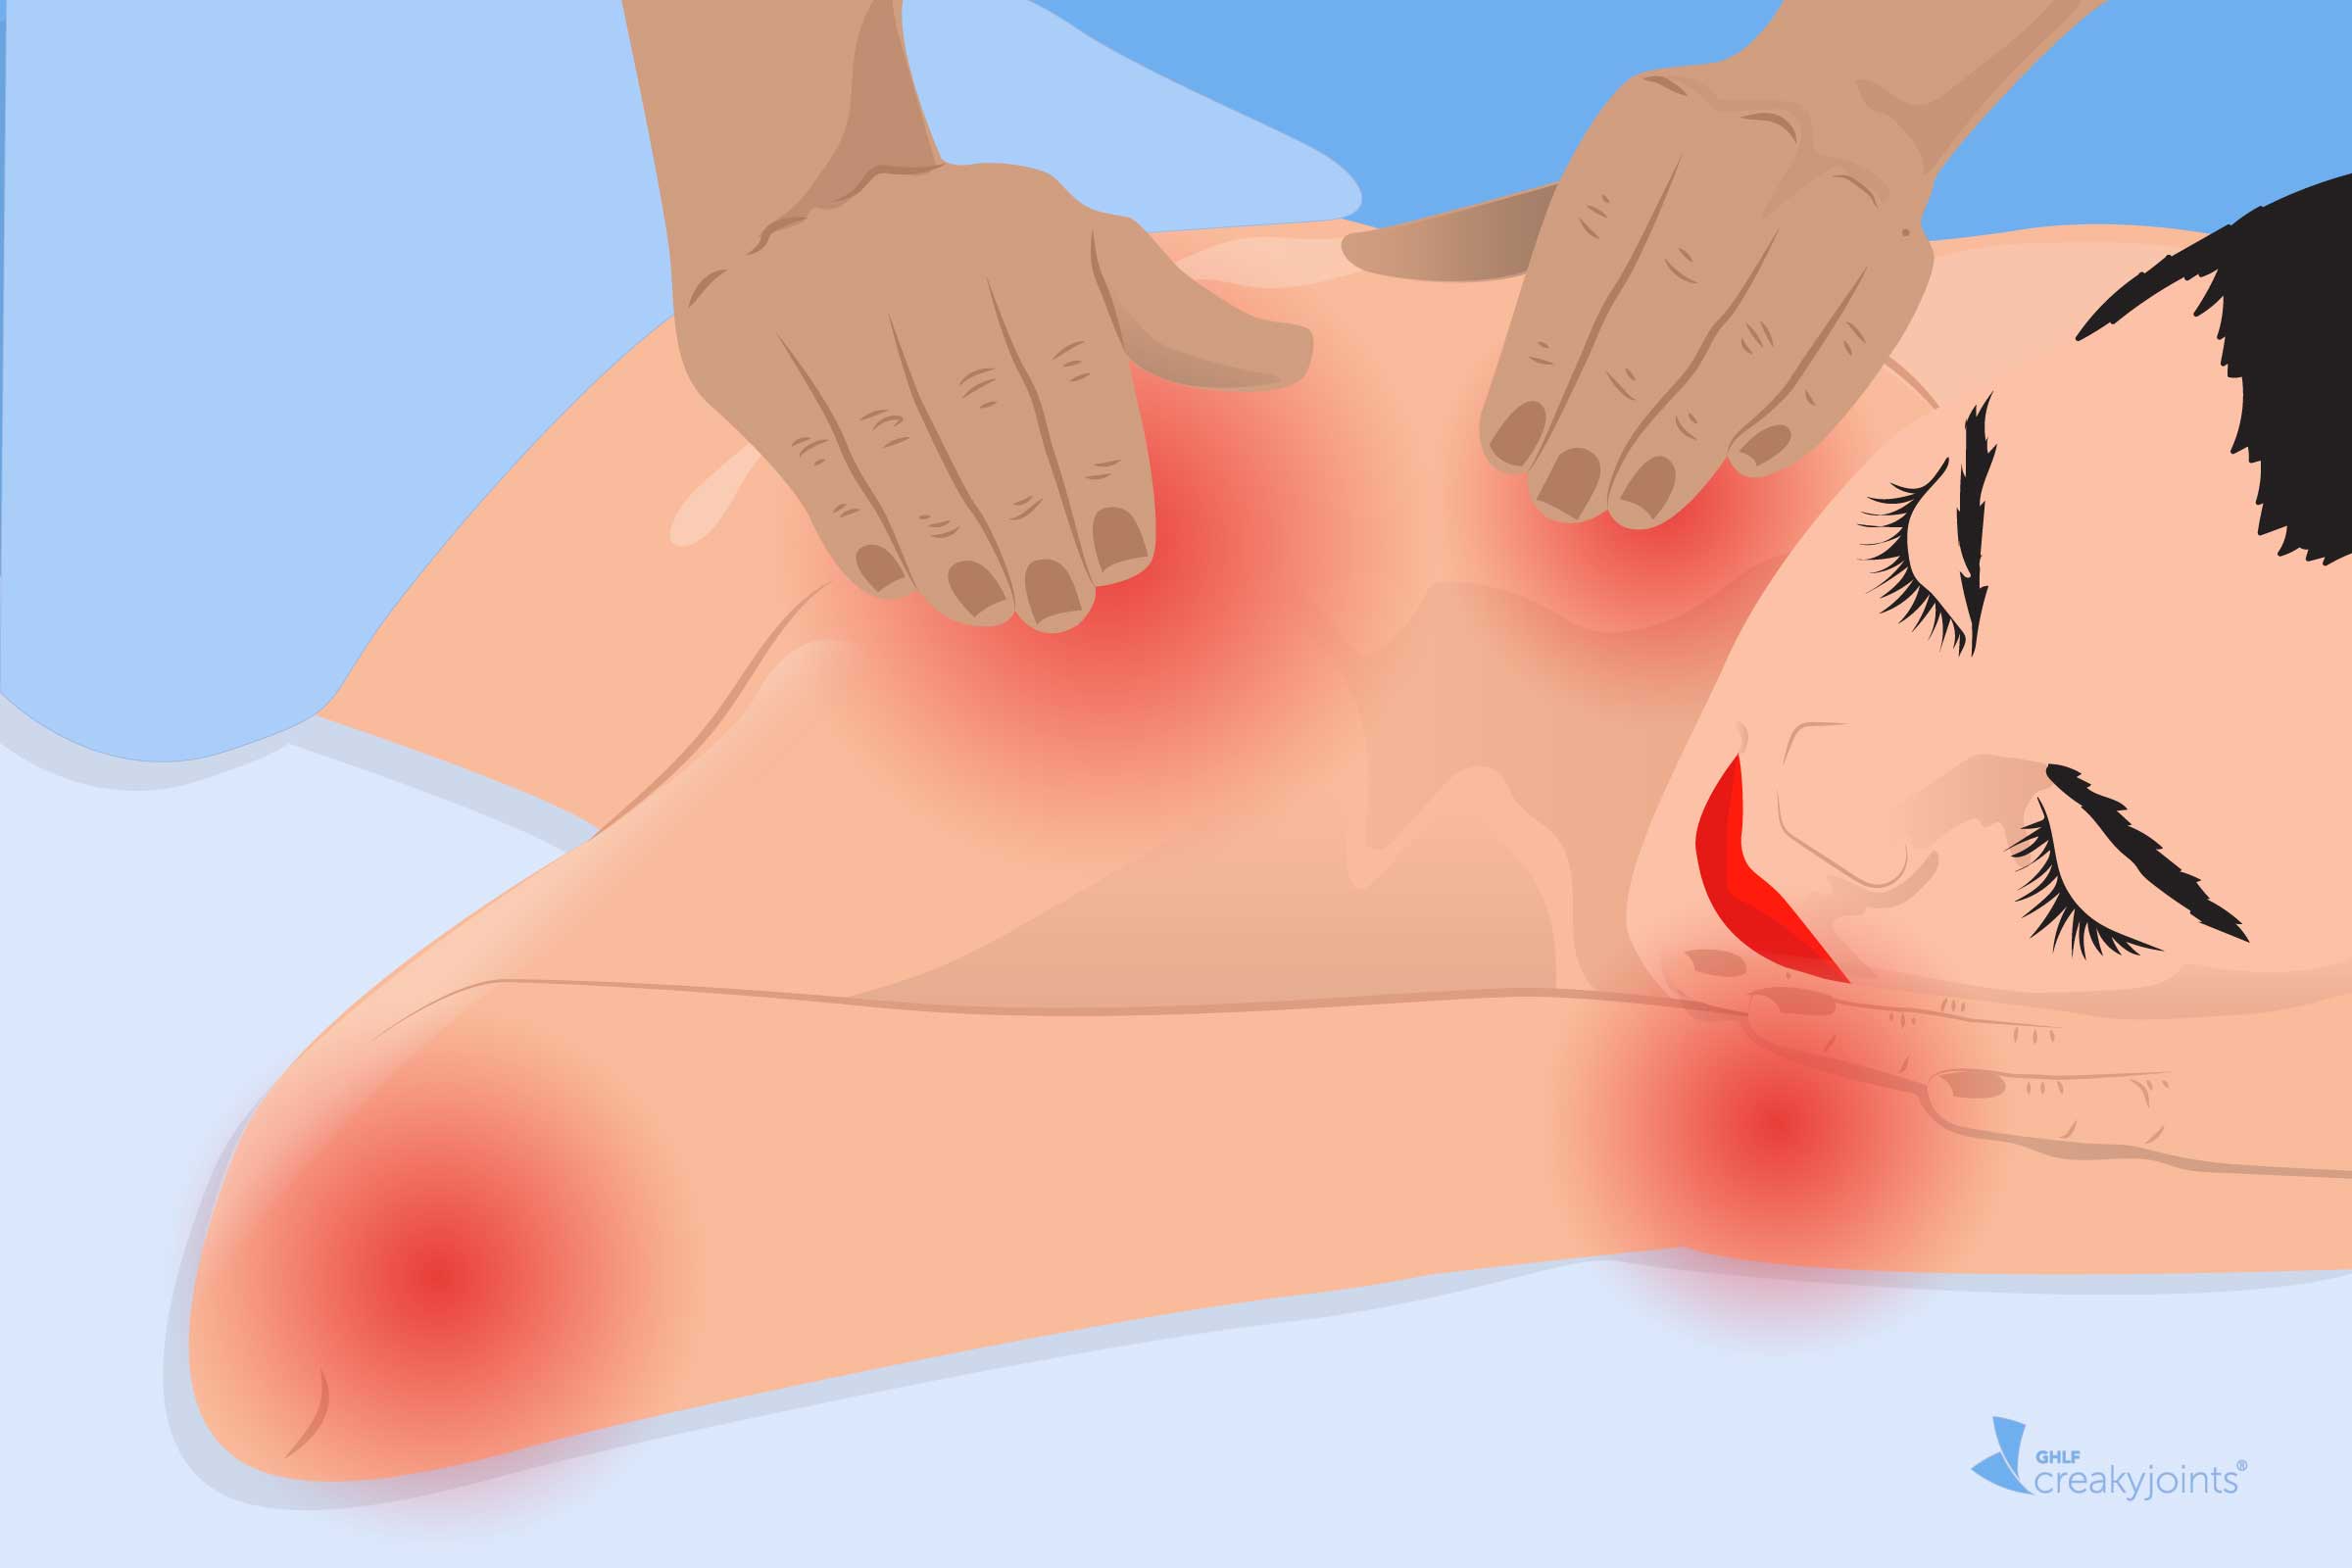 Self Massage Techniques For 9 Body Parts - How To Massage Yourself